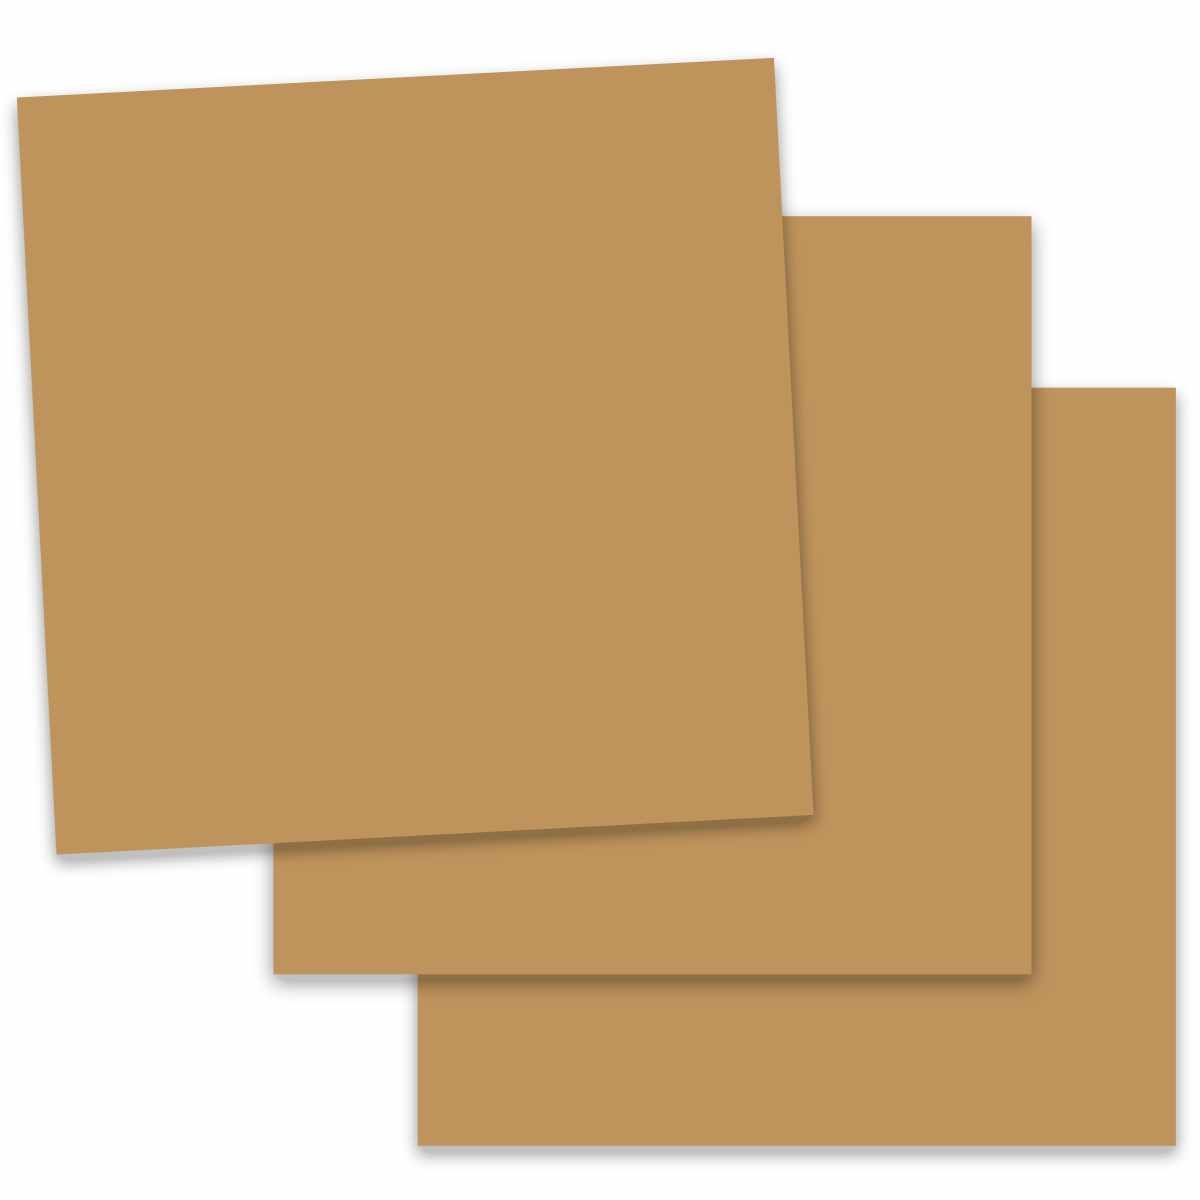 Burano BUFF (02) - 12X12 Cardstock Paper - 92lb Cover (250gsm